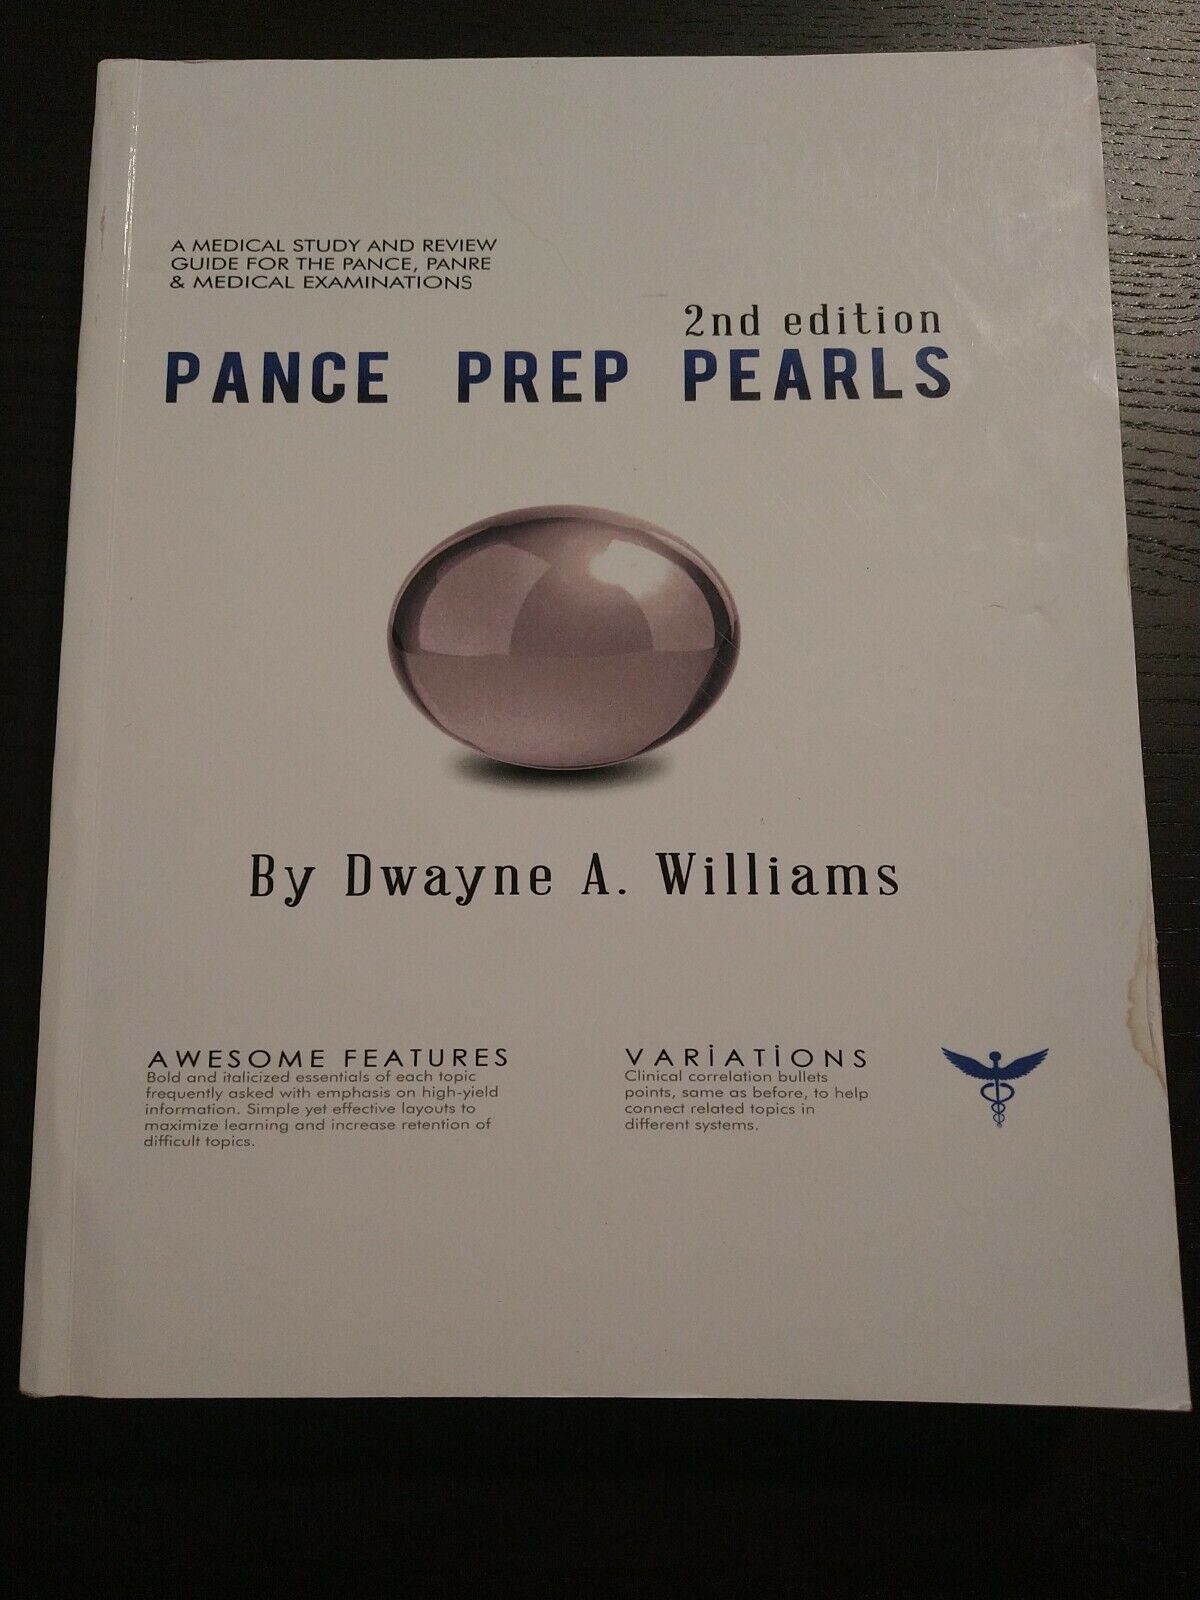 Pance Prep Pearls 2nd Edition by Dwayne Williams (2017, Trade Paperback)